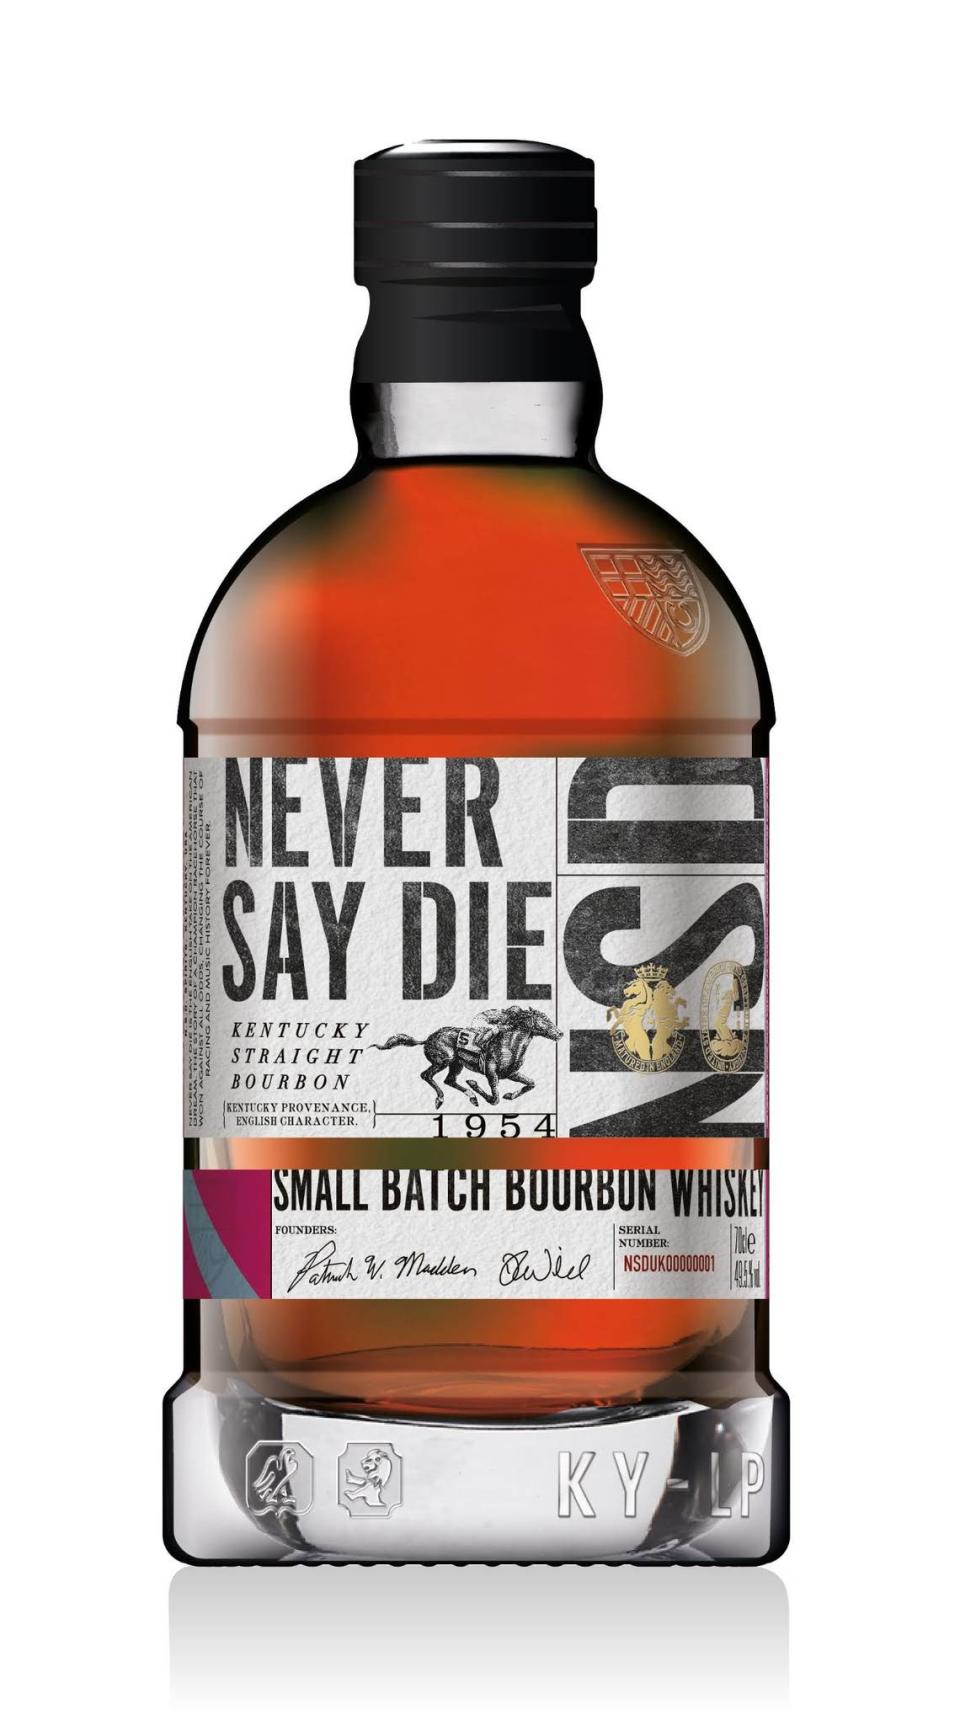 Never Say Die Small Batch Bourbon was launched in 2022 in England by Kentucky businessmen and English friends. The bottles are now hitting shelves in Kentucky.